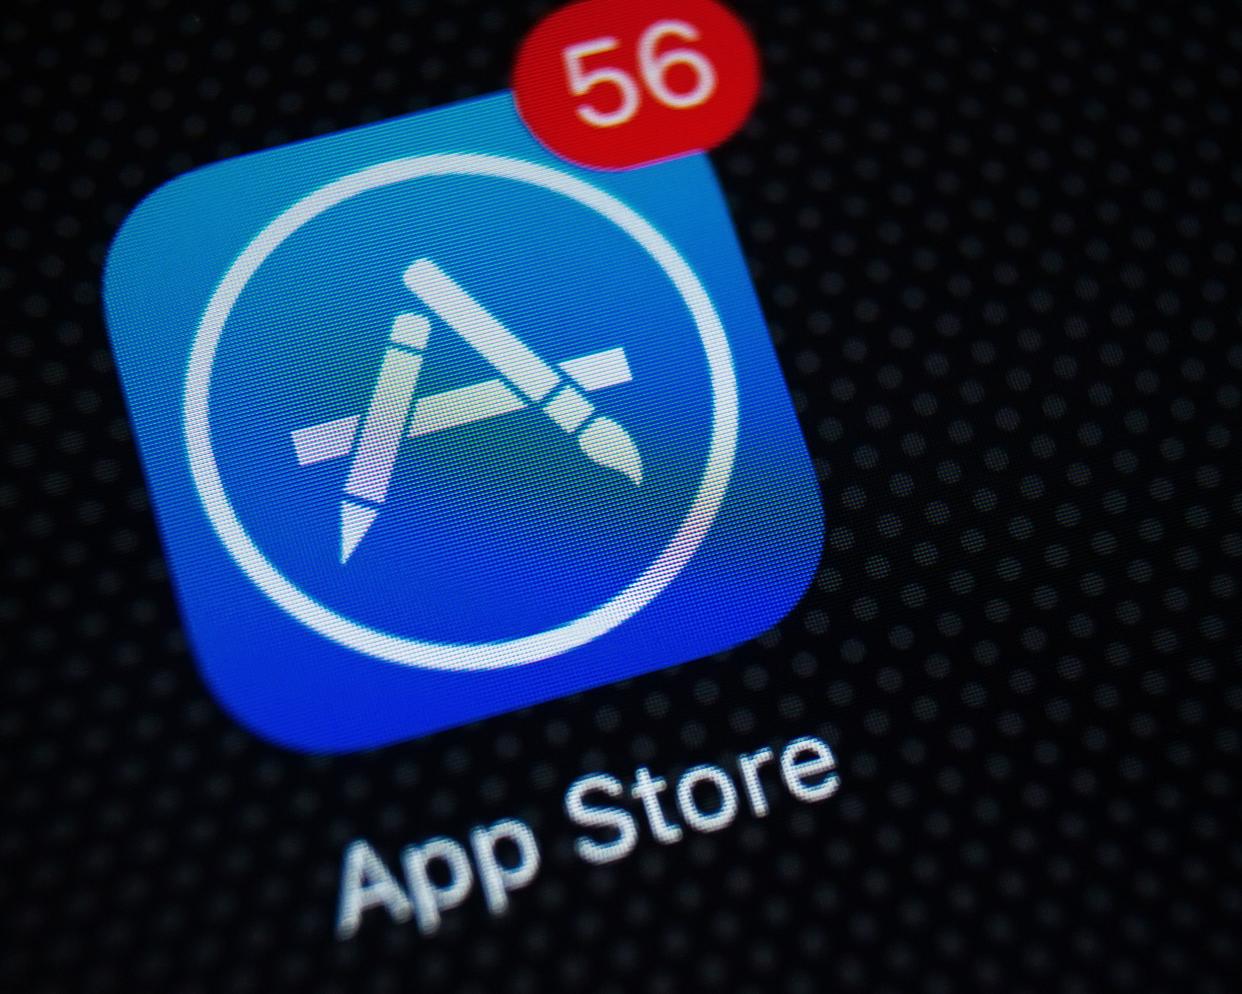 close-up of the App Store application icon on the screen of the iPhone 6